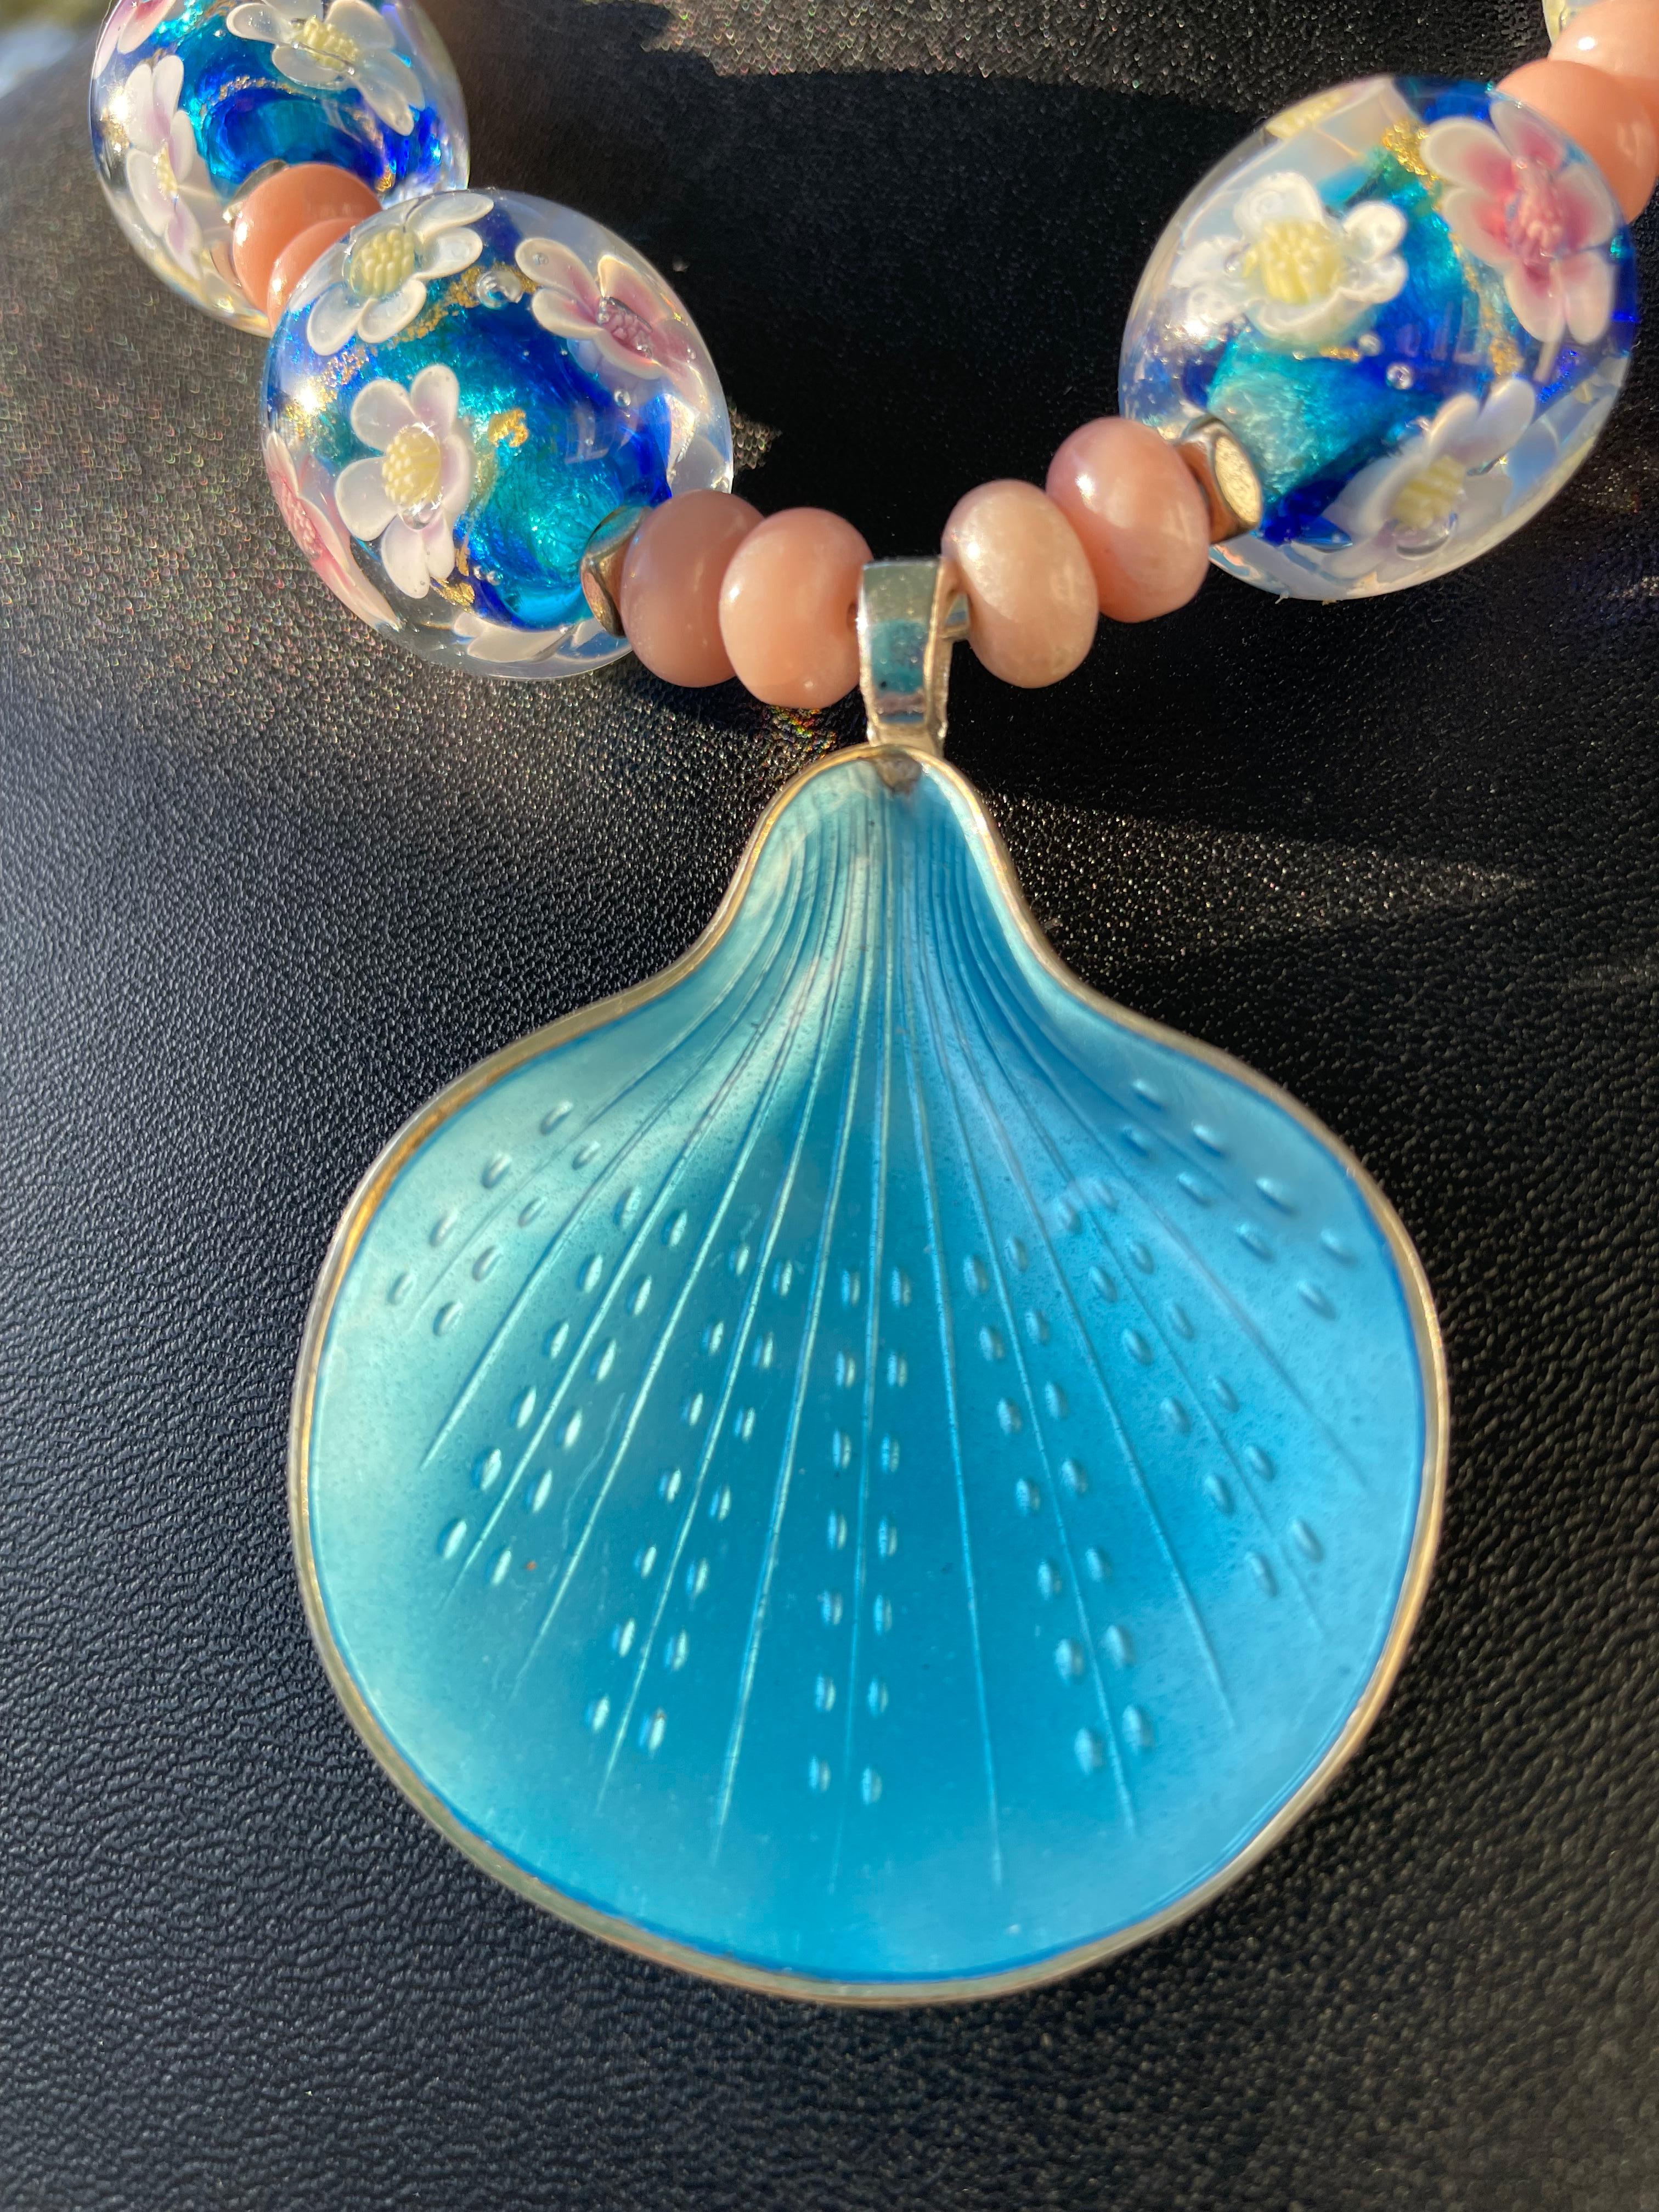 Lorraine’s Bijoux offers a Vintage 50’s Danish Enamel and Sterling Silver brooch pendant Necklace. This is a stunning turquoise enamel piece that is a wonderful example of Danish craftsmanship and makes an incredible centerpiece on a gorgeous